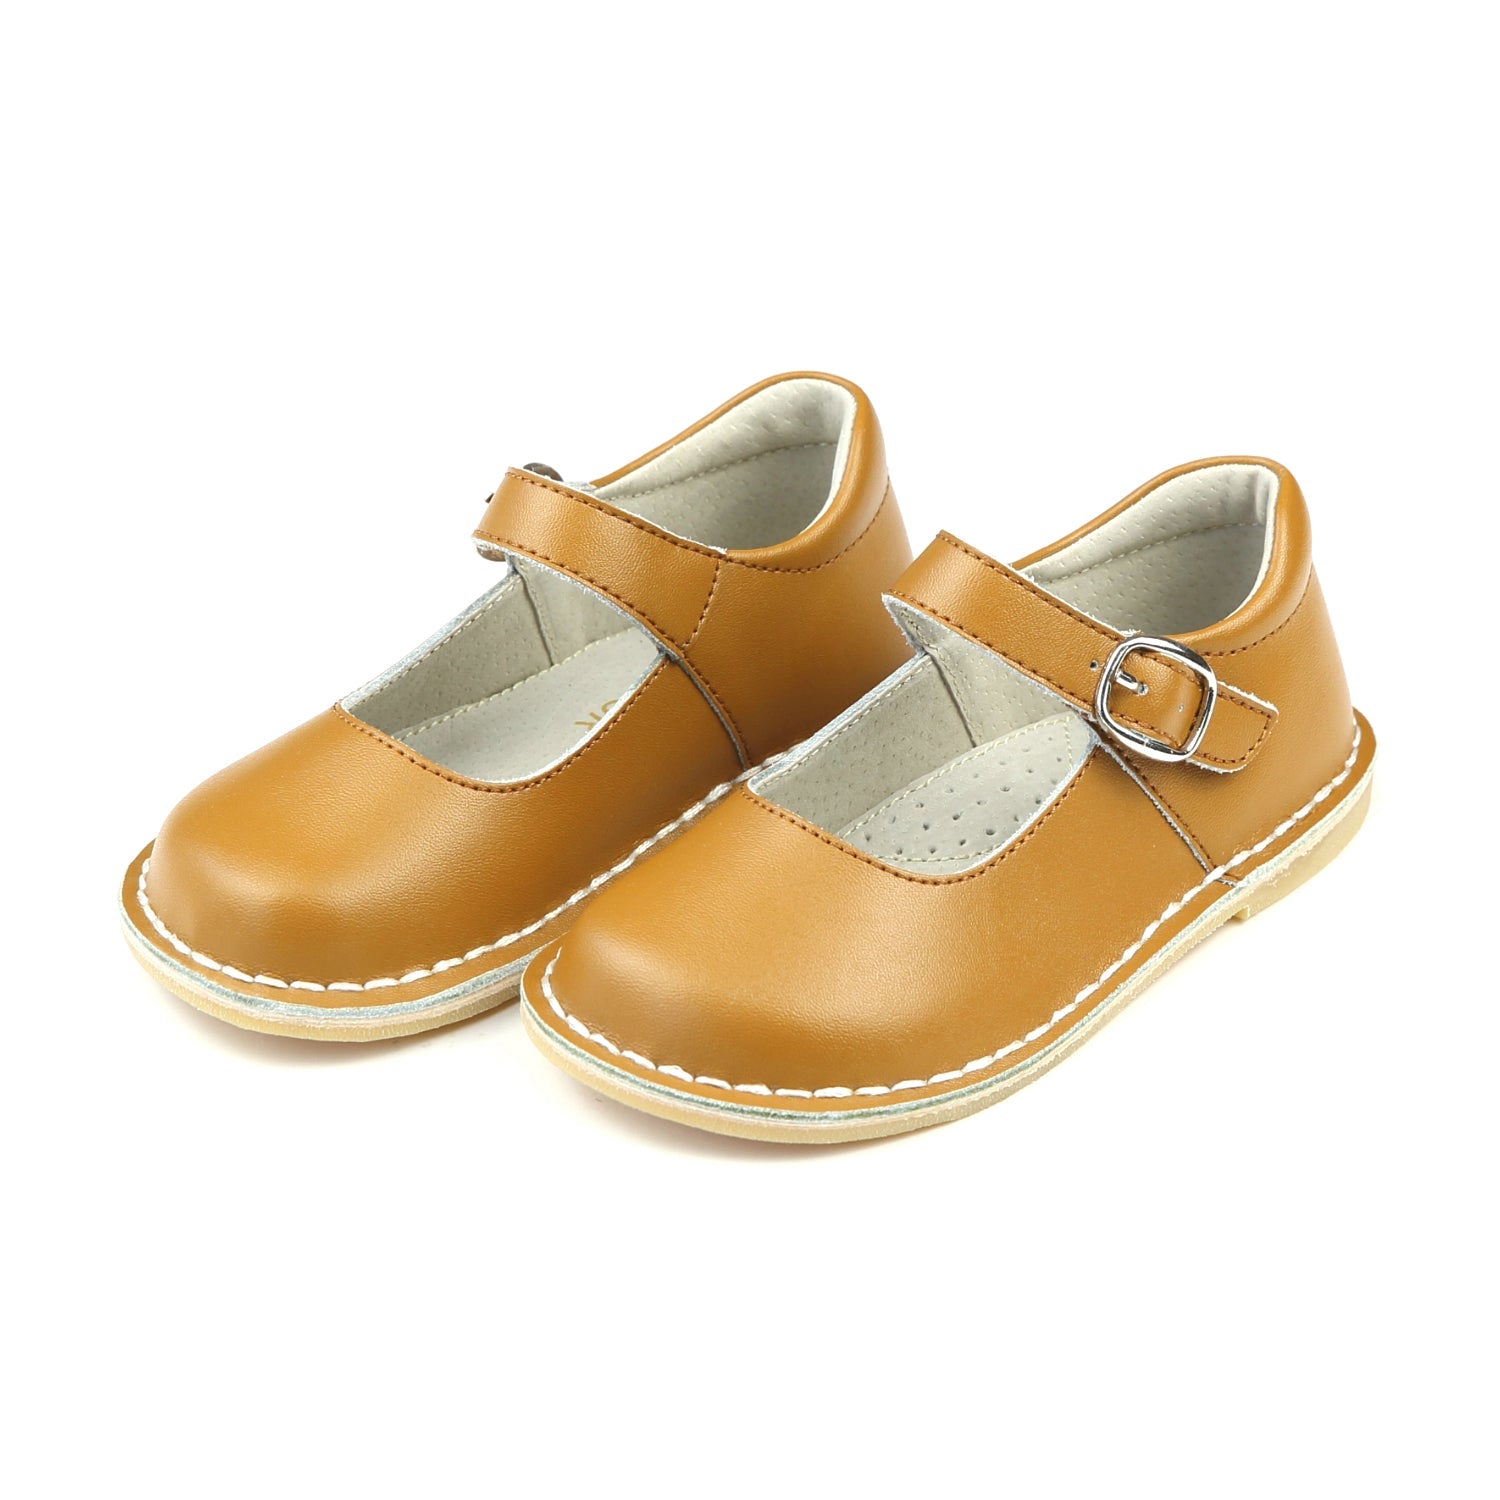 Mary Janes Leather School | Grace